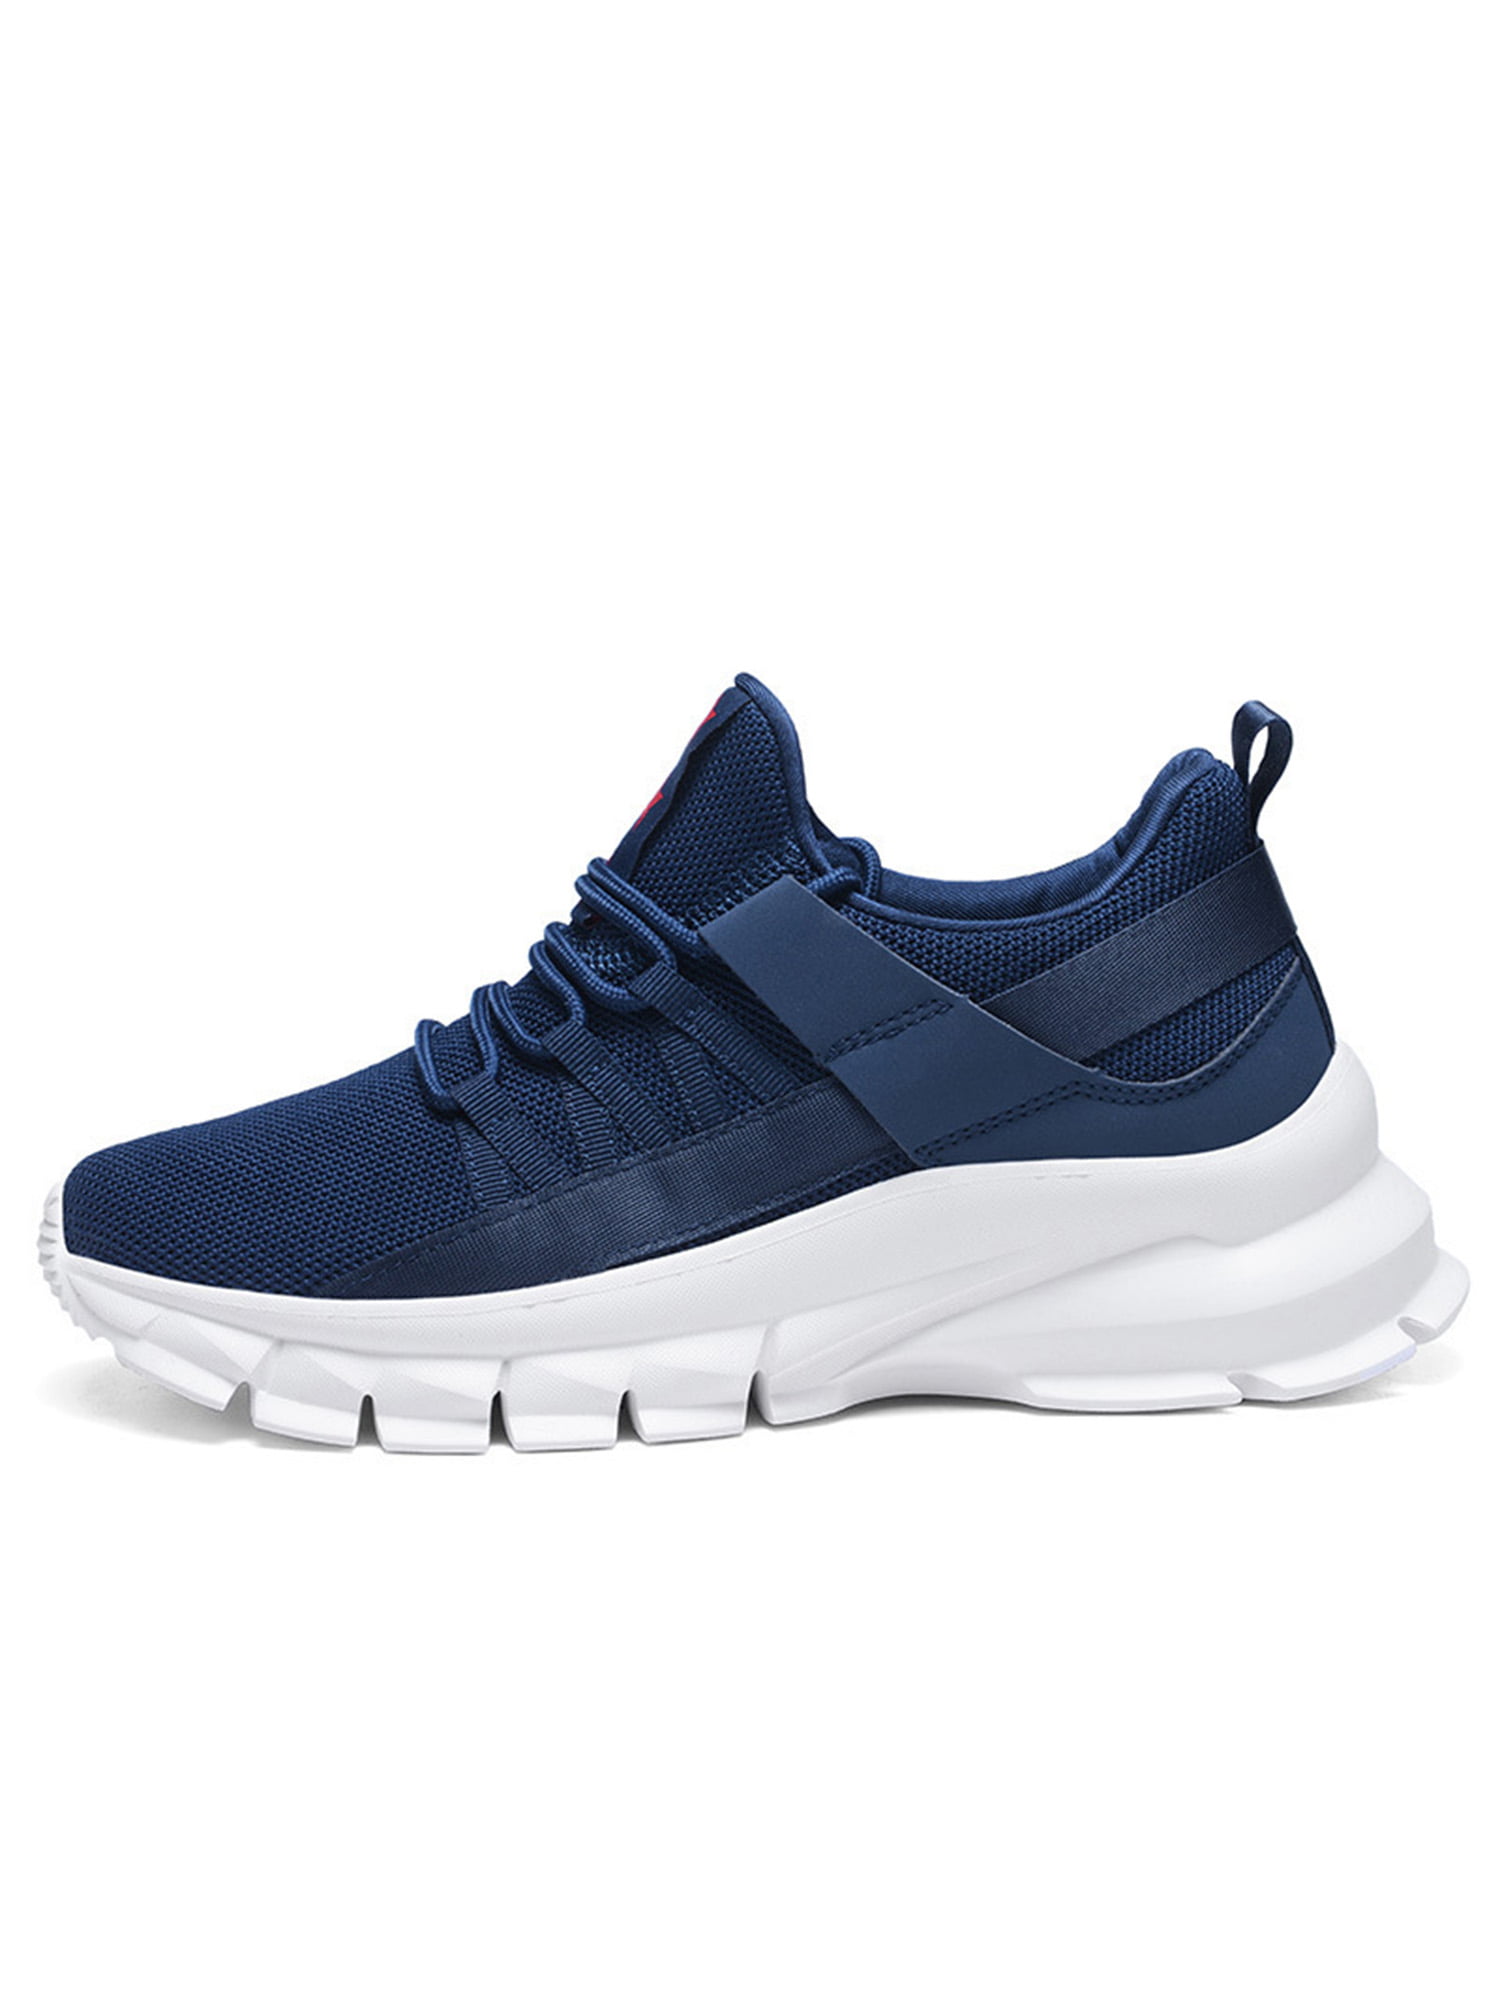 Choice of Size:9,9.5,10,10.5,13* New FUBU Bolt Men's Athletic Shoes Navy/Yellow 